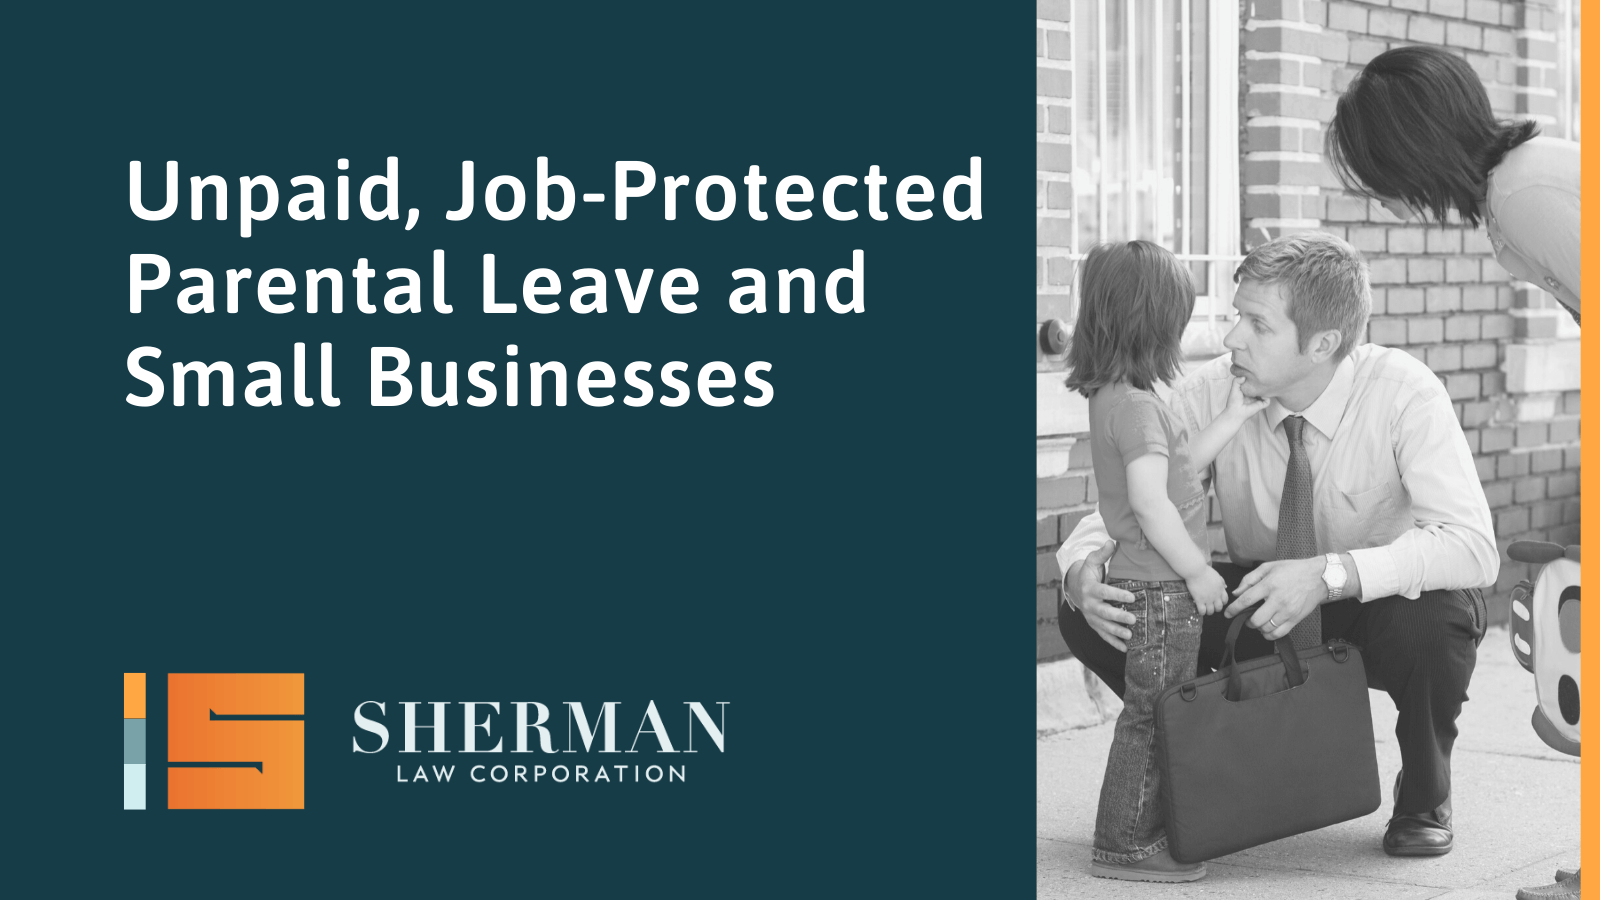 Unpaid, Job-Protected Parental Leave and Small Businesses- A Brief Case Study - sherman law corporation